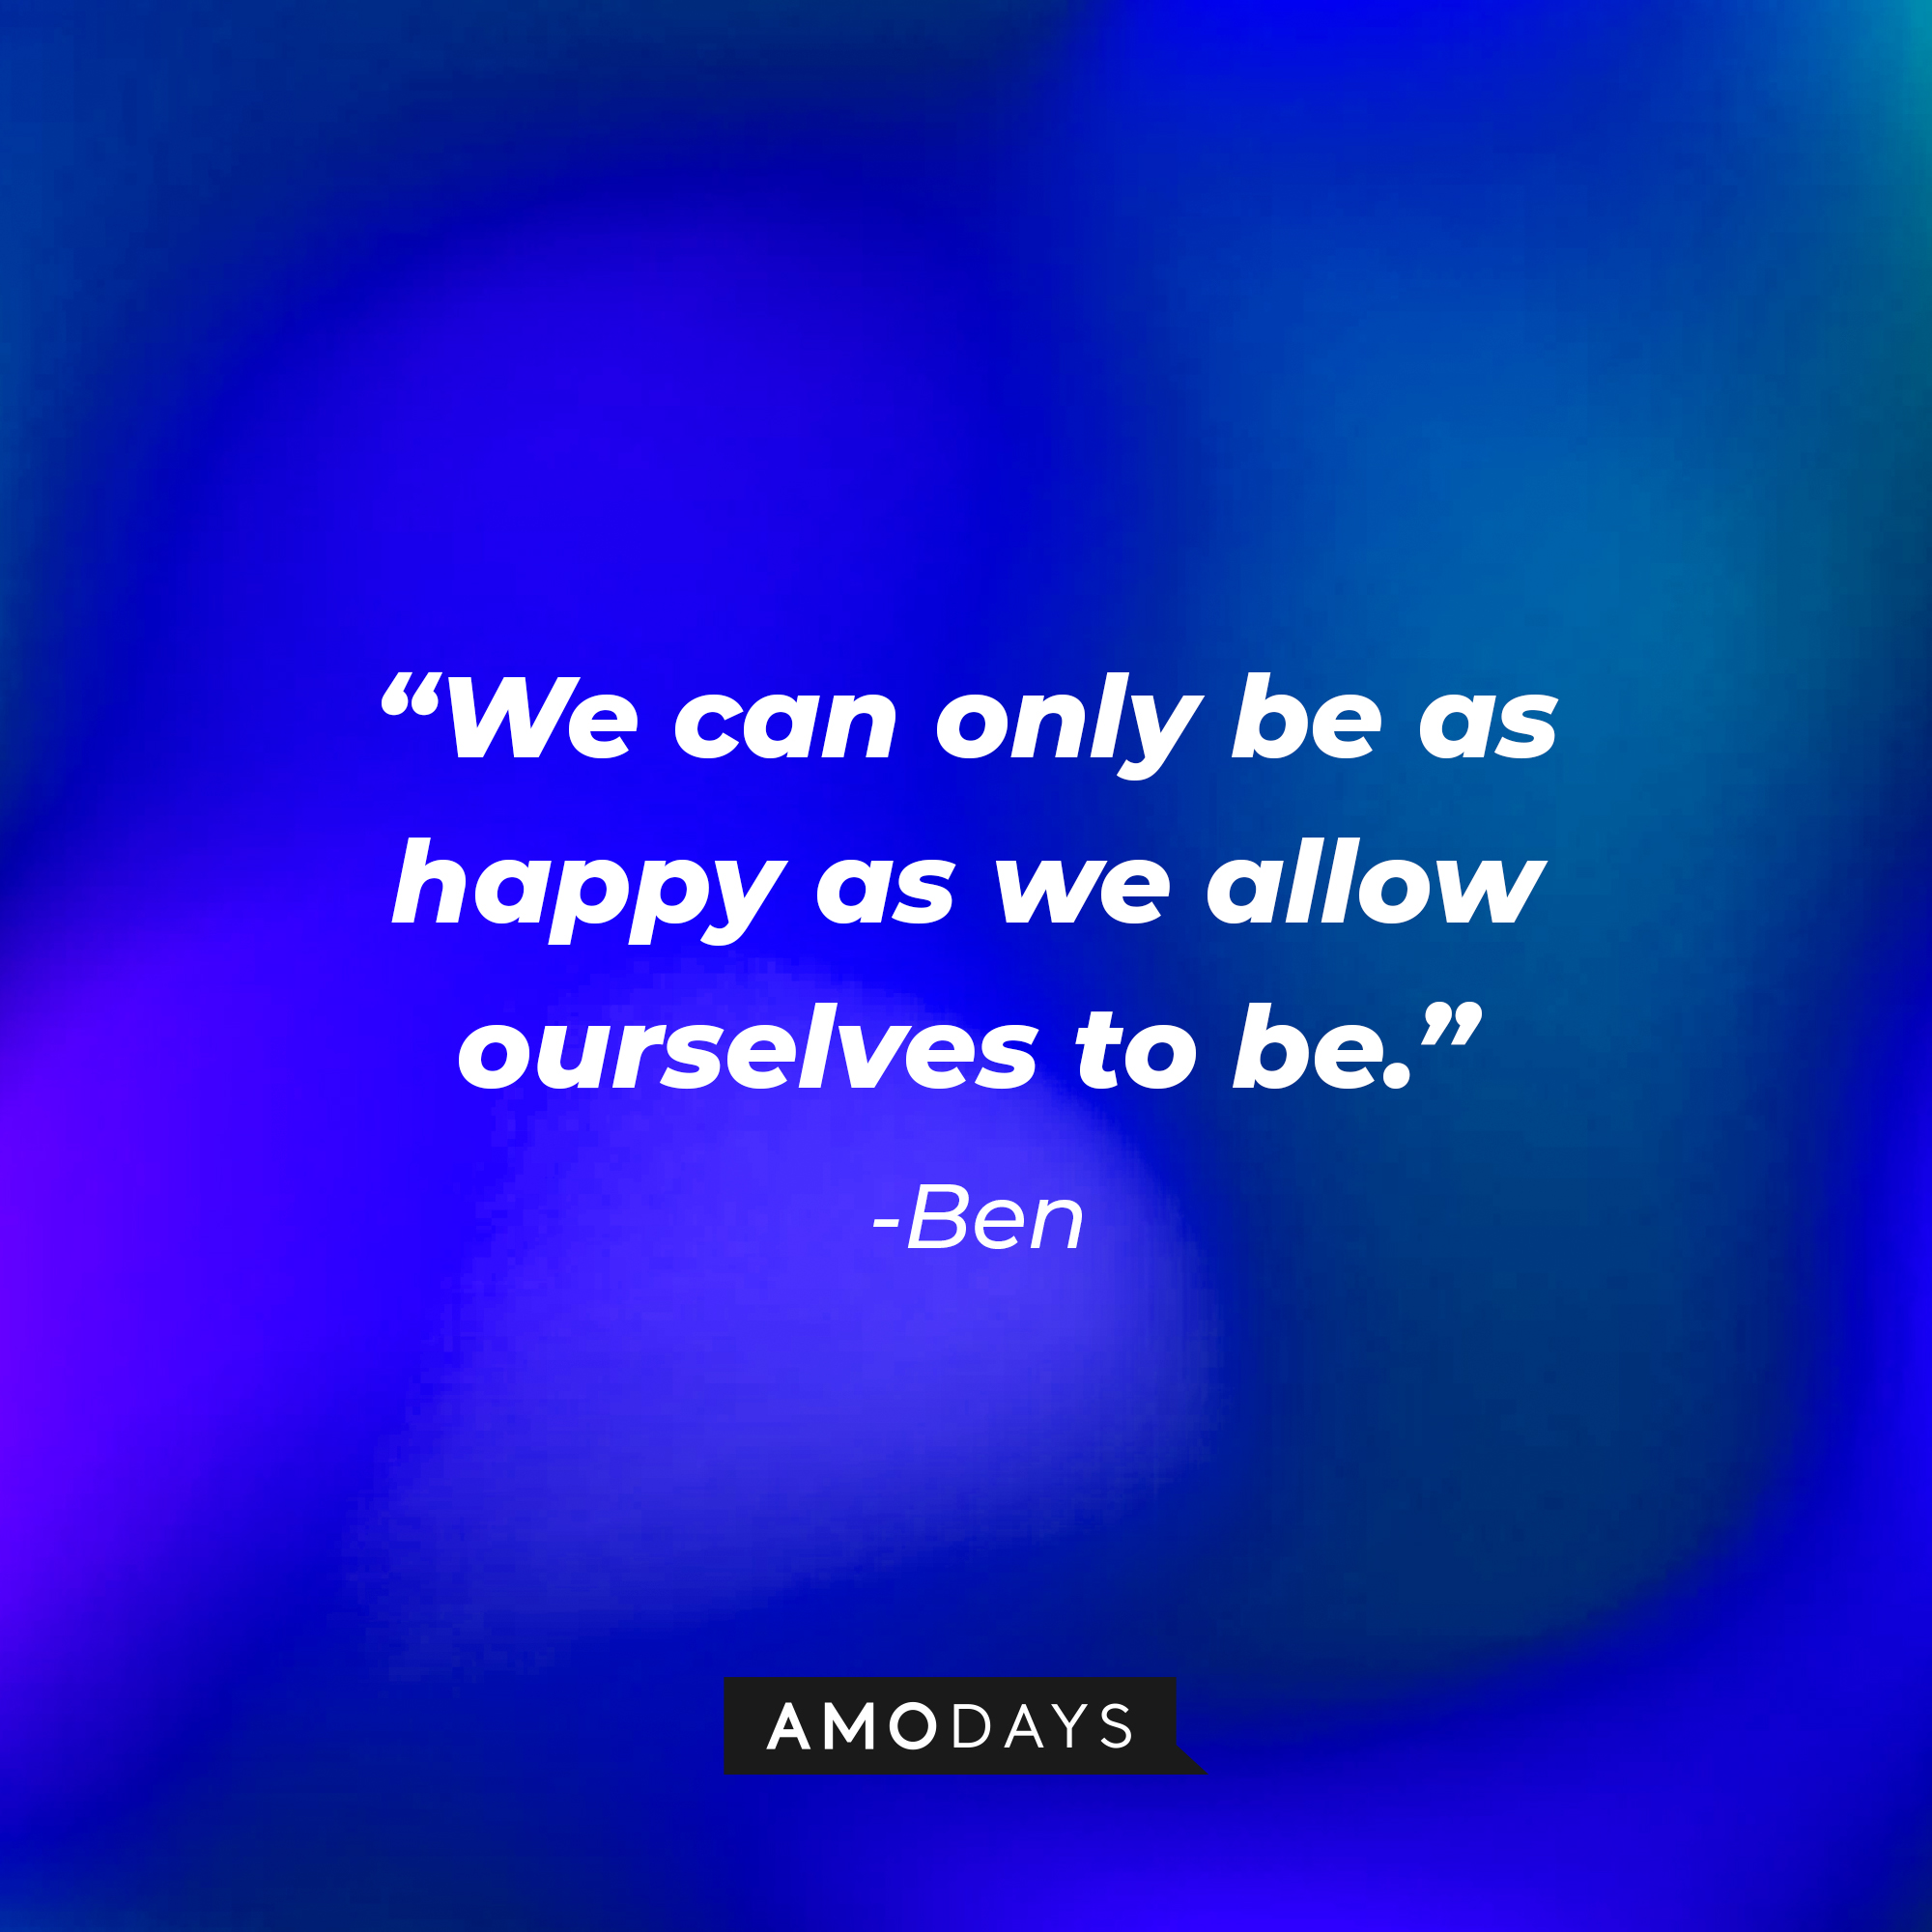 Ben’s quote from “Modern Love”: "We can only be as happy as we allow ourselves to be."  | Source: AmoDays